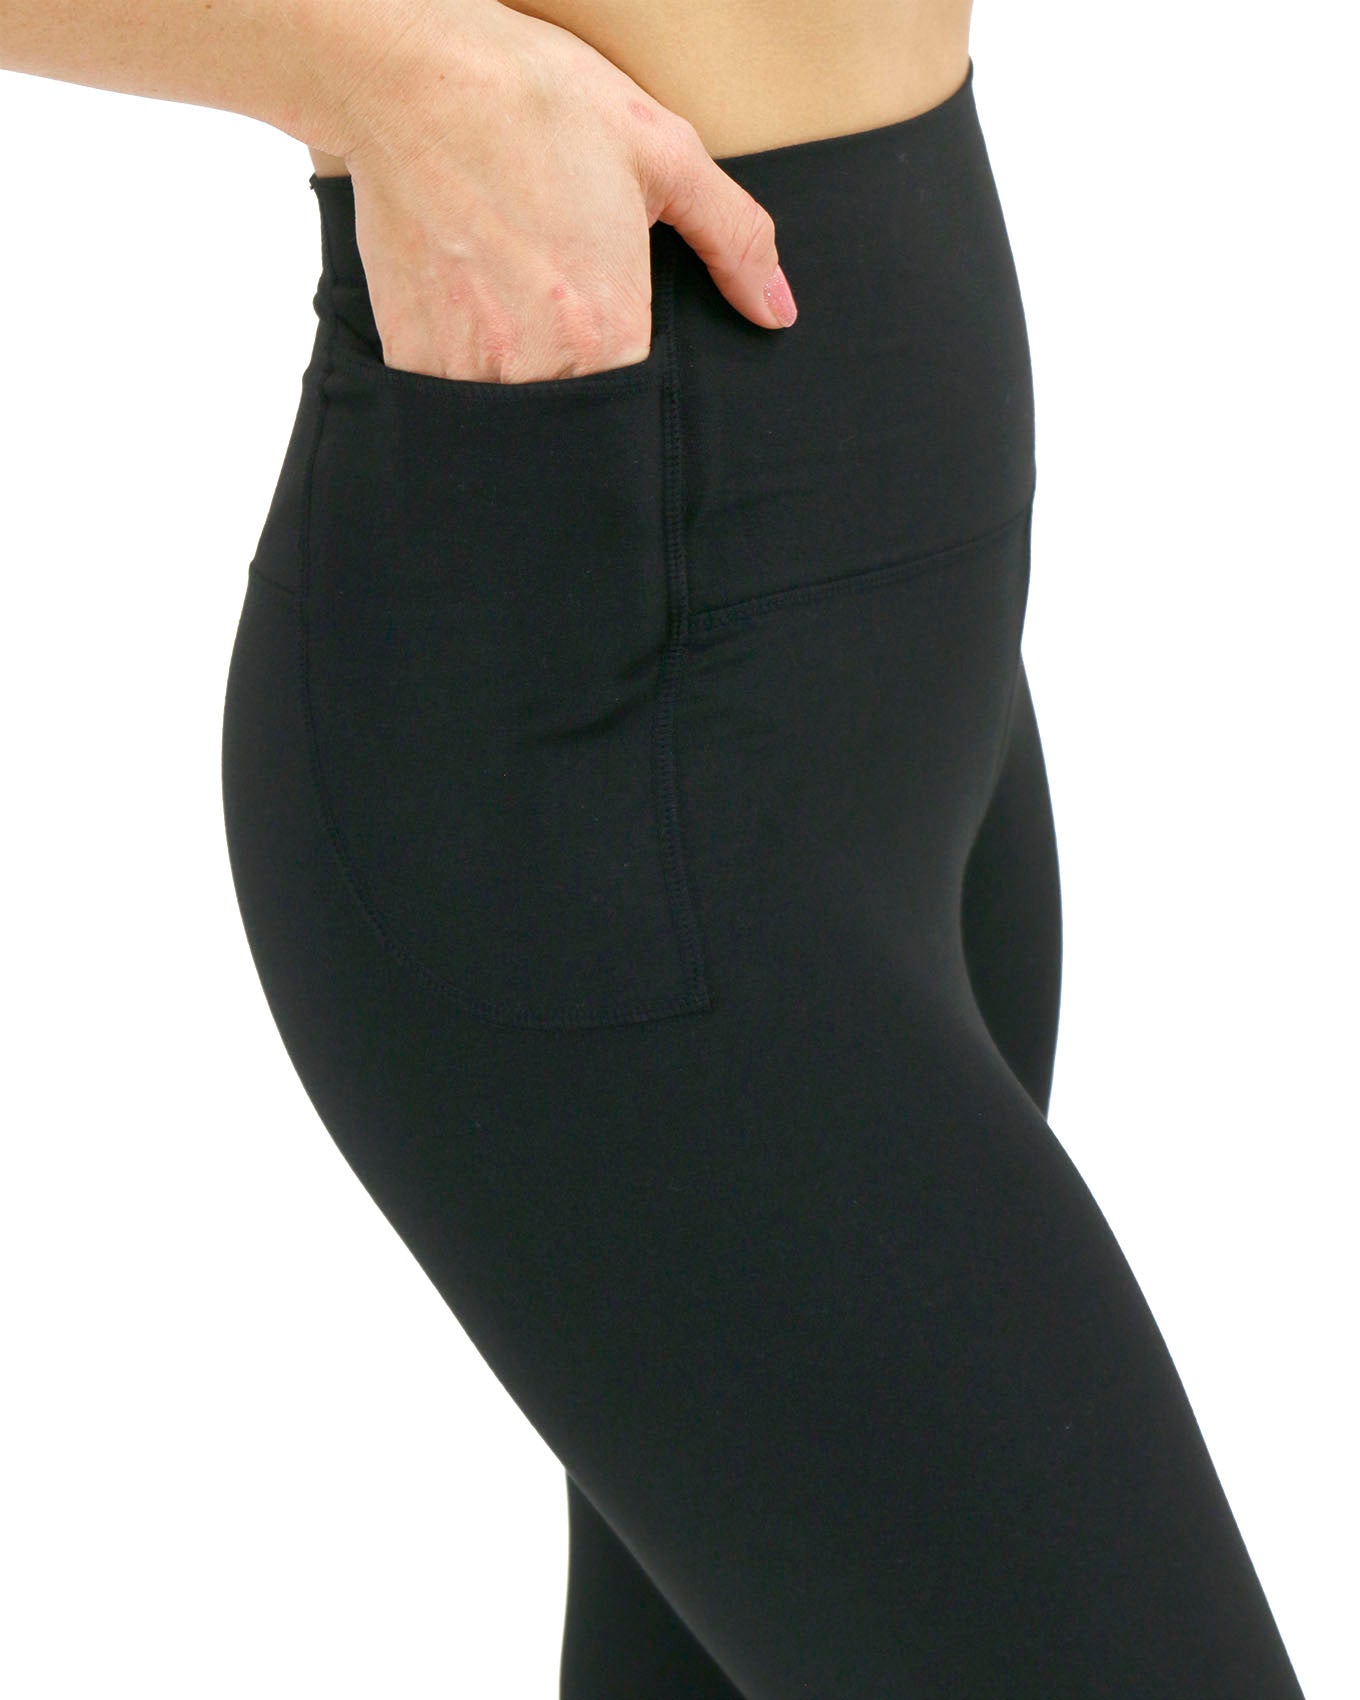 Up To 83% Off on Women's High Waist Active Yog